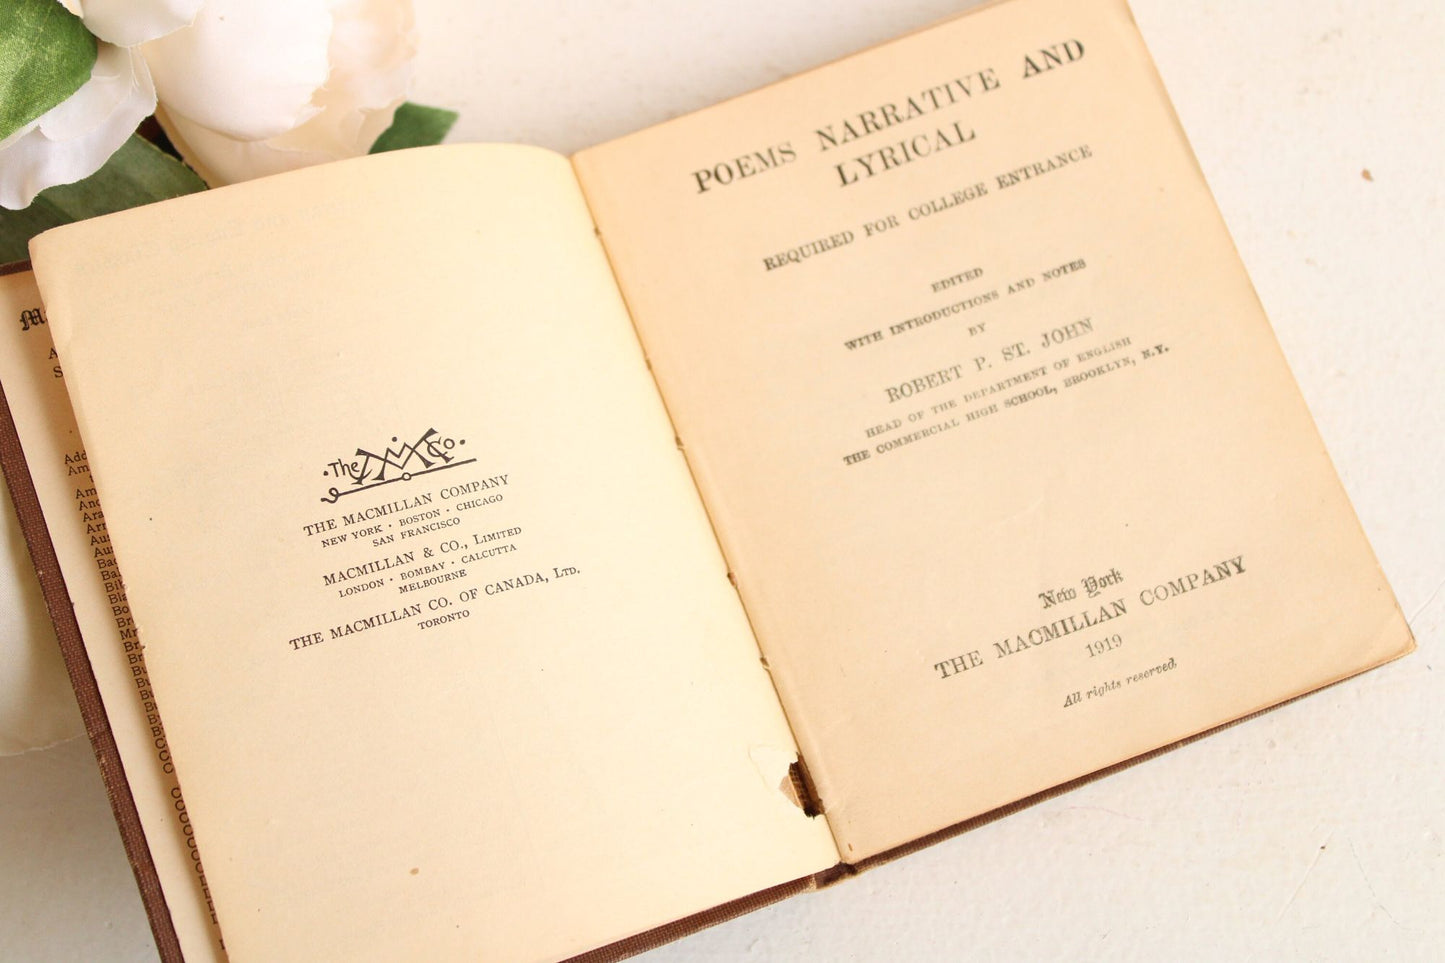 Vintage 1910s Book,"Poems, Narrative and Lyrical, Required for College Entrance" by Robert P. St John